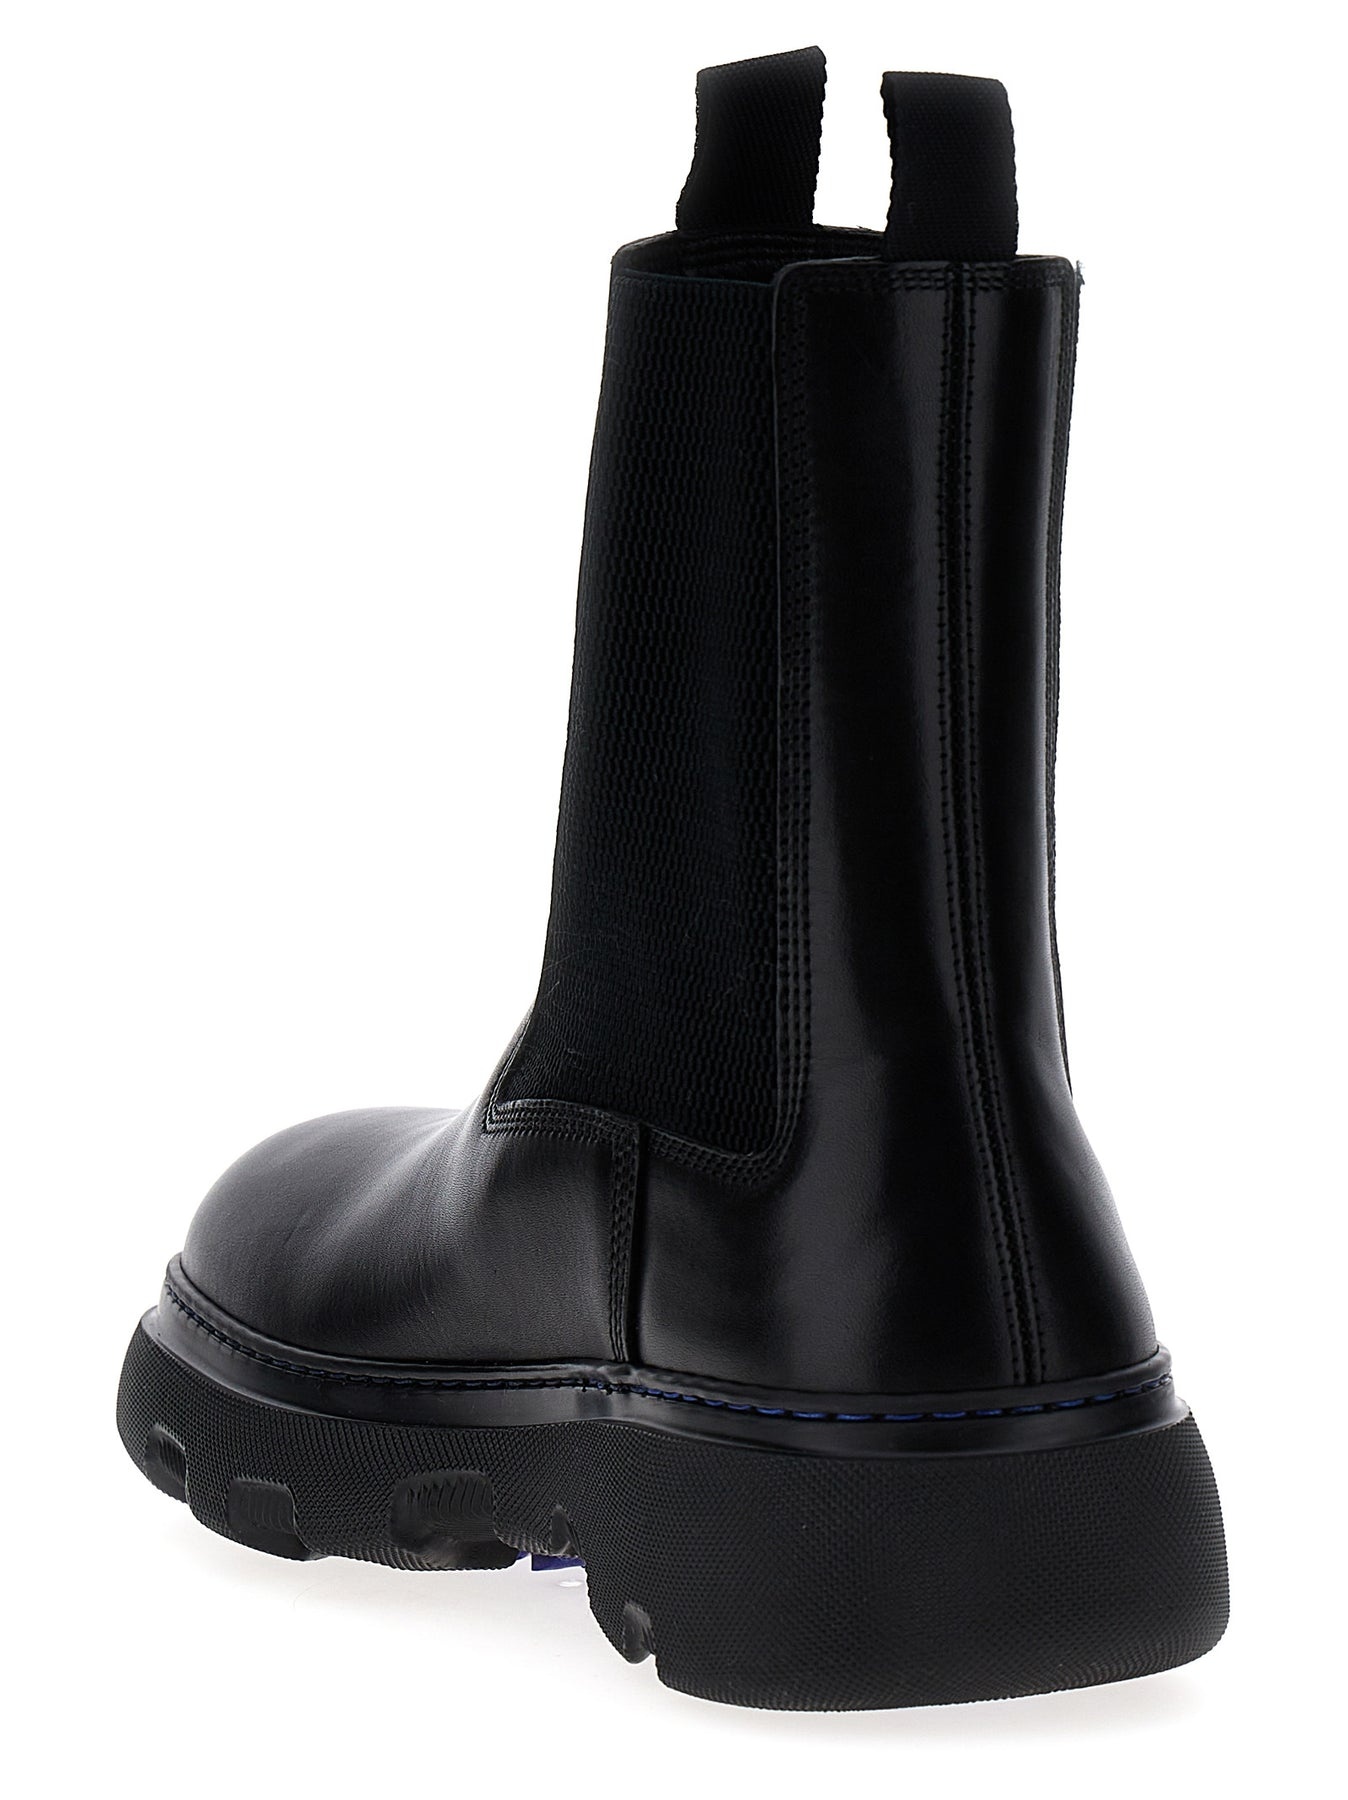 Chelsea Boots, Ankle Boots Black - 3